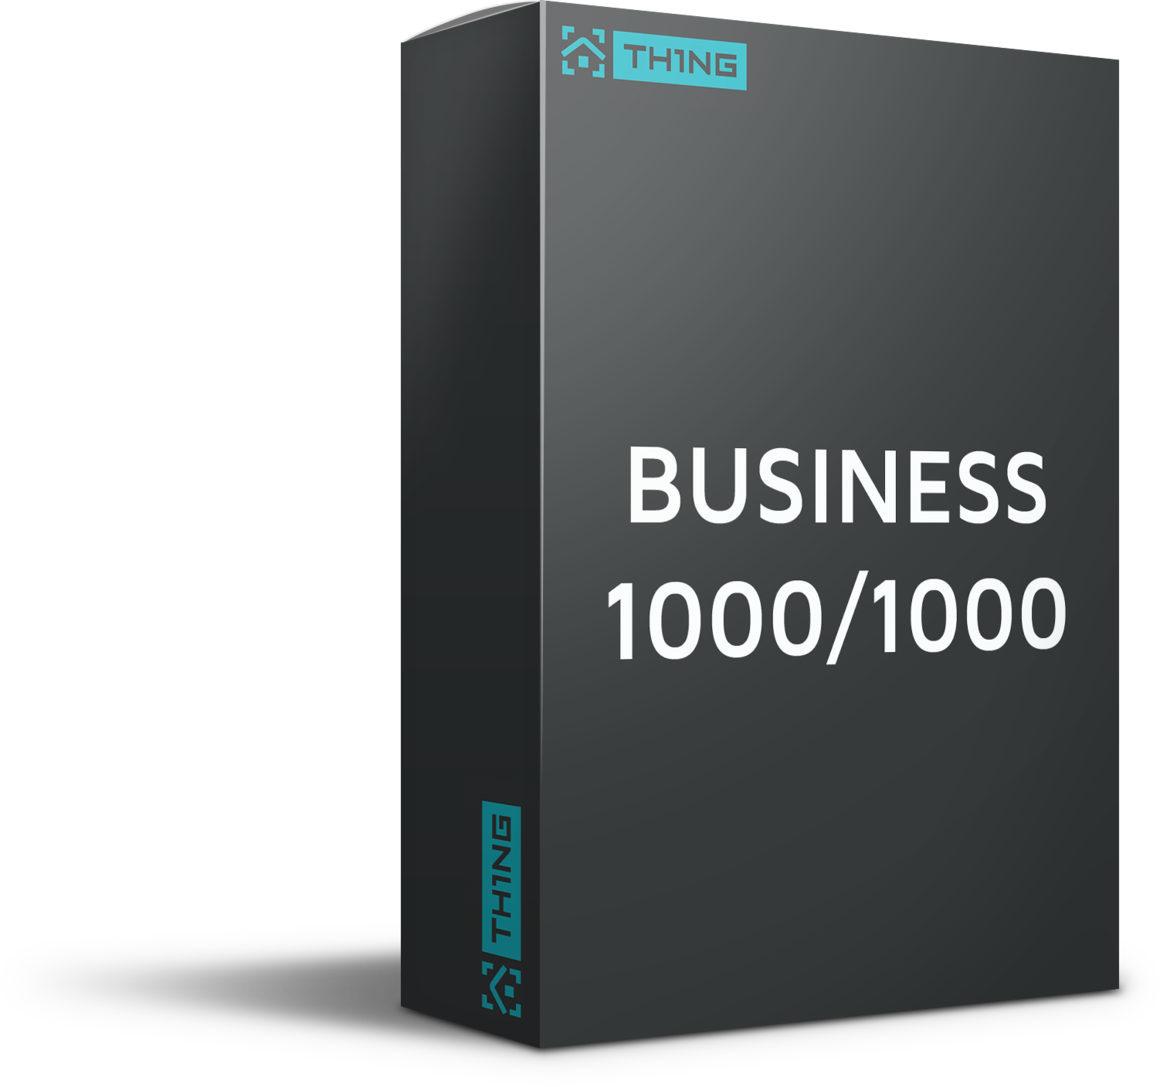 Produktbox_business_1000_1000